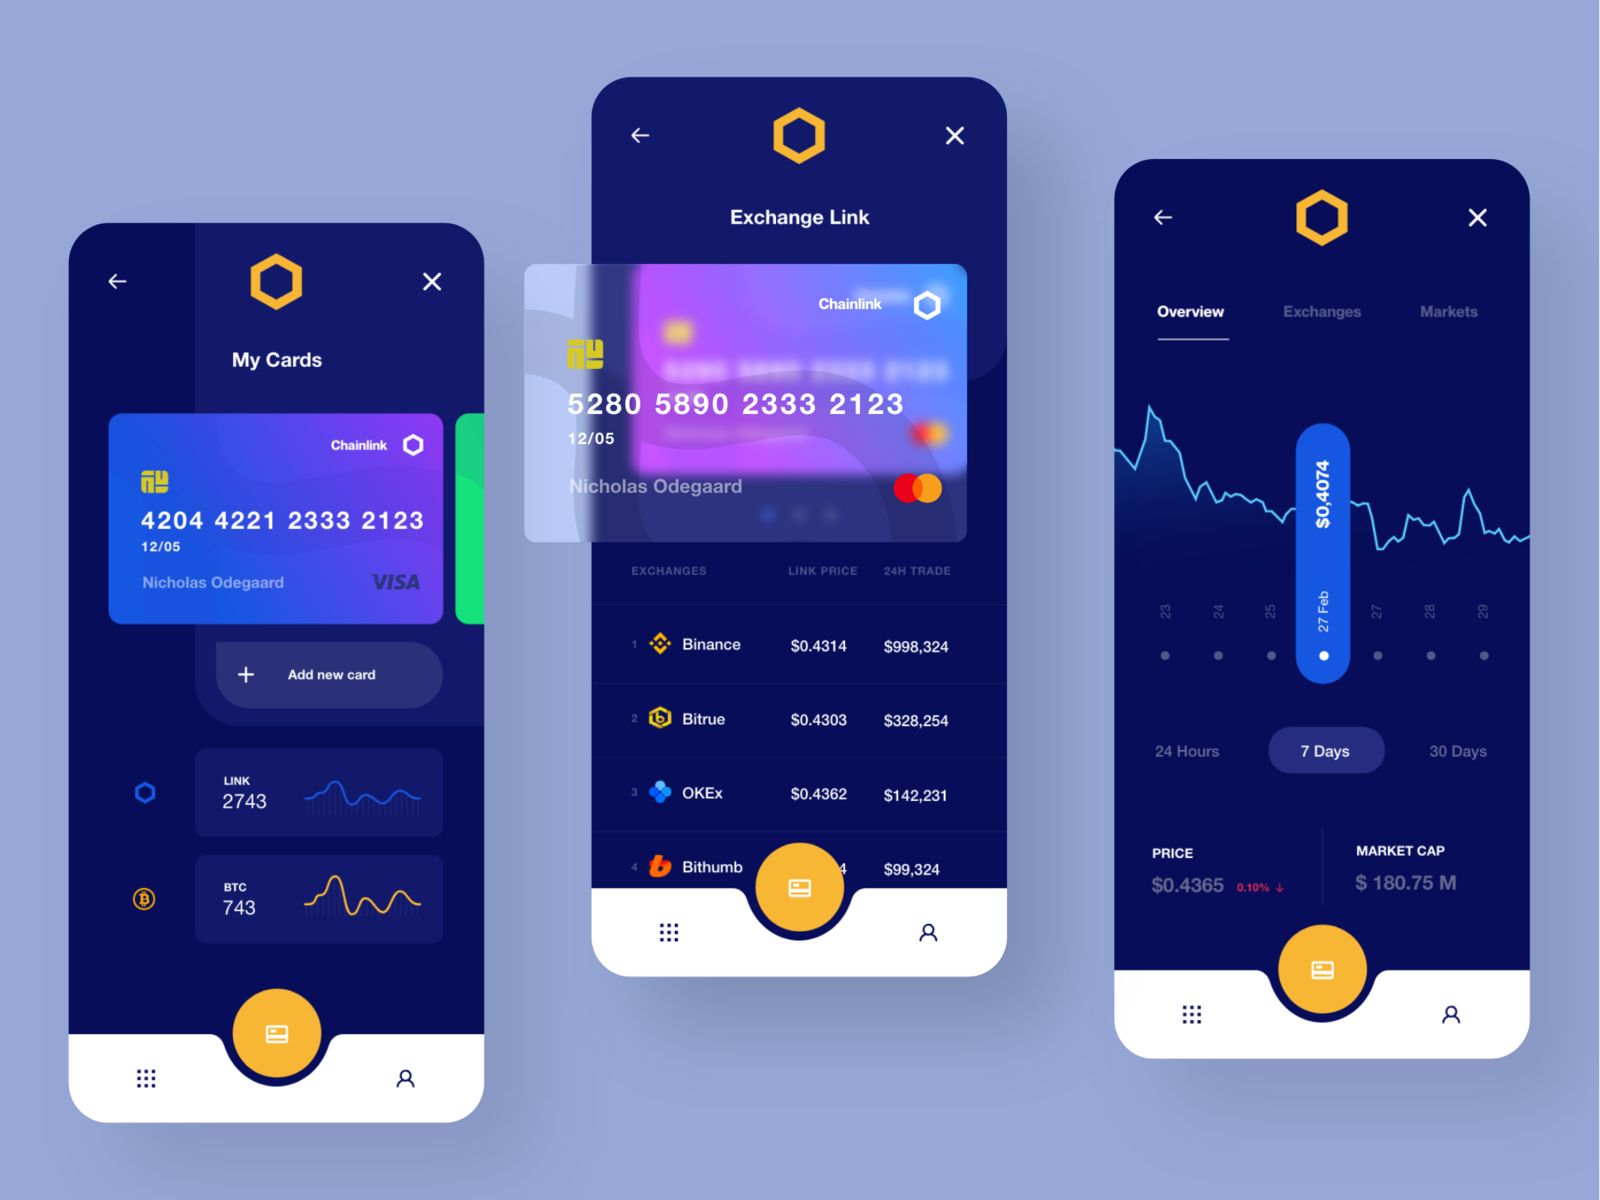 Chainlink Exchange by Nicholas Ergemla for Awsmd on Dribbble